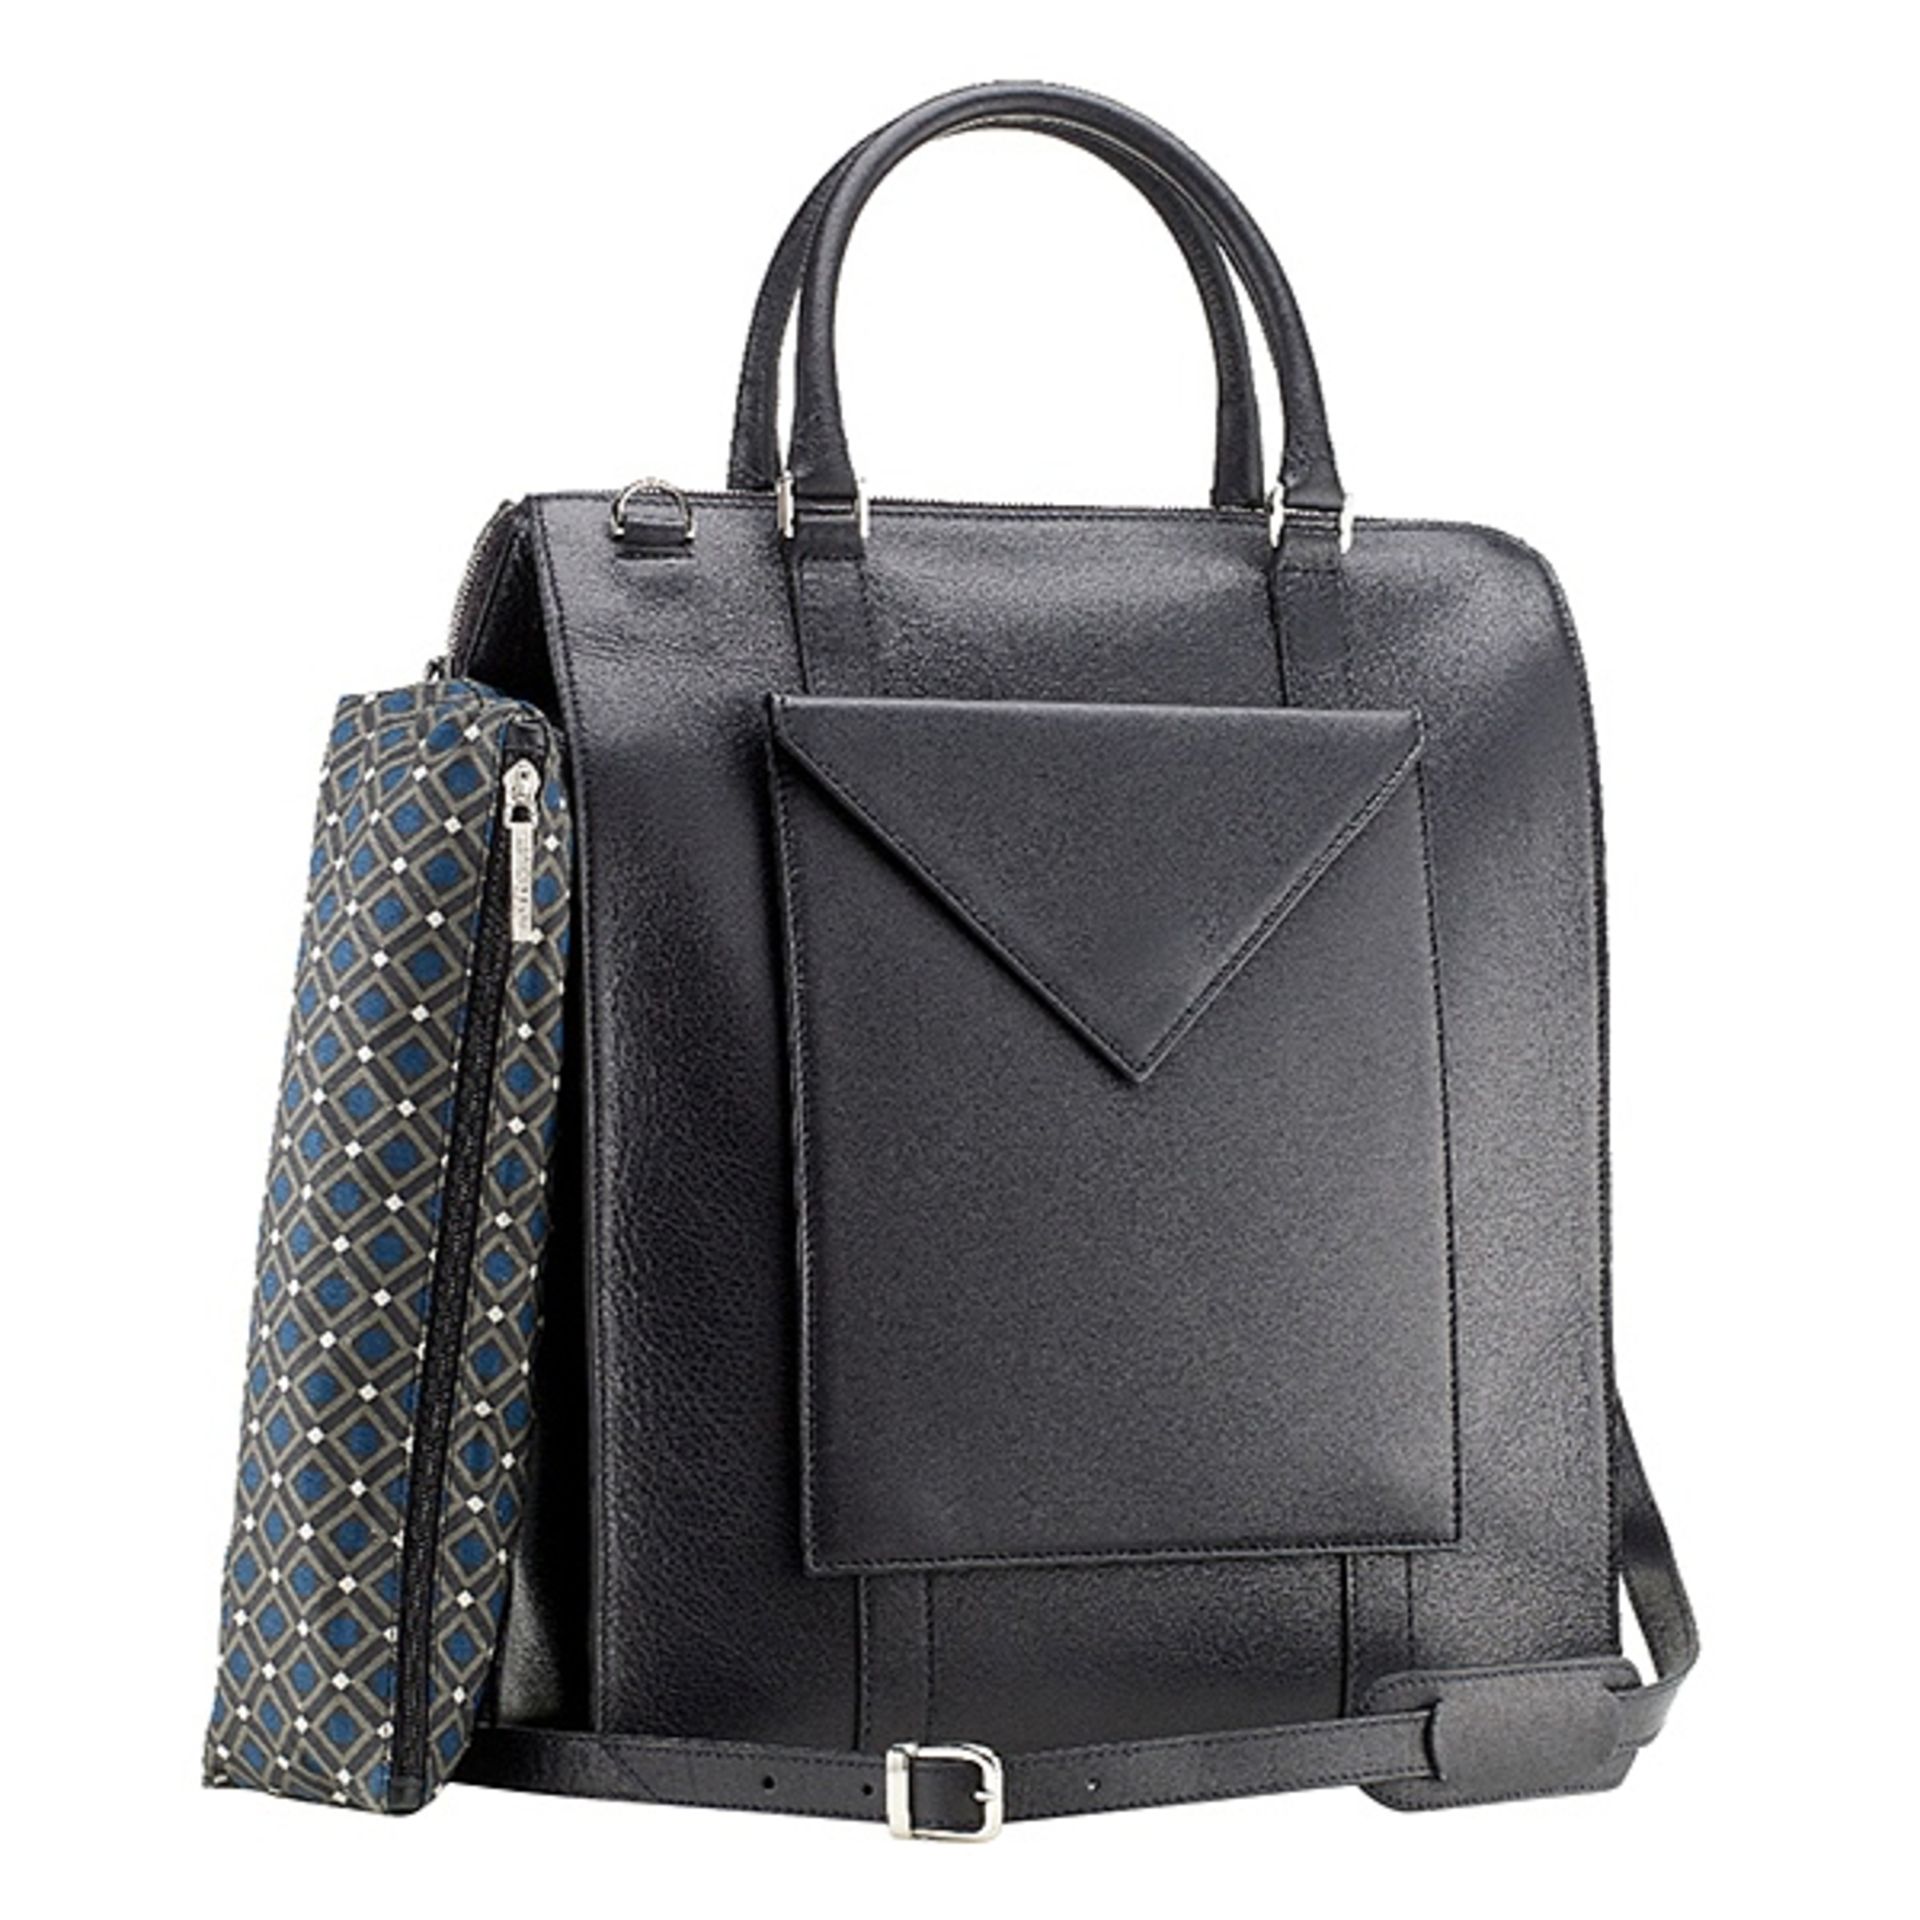 LEATHER NAPPA TOTE BAG LEATHER NAPPA TOTE BAG VENICE BLACK LEATHER TOTE BAG WITH IPAD CASE VENICE